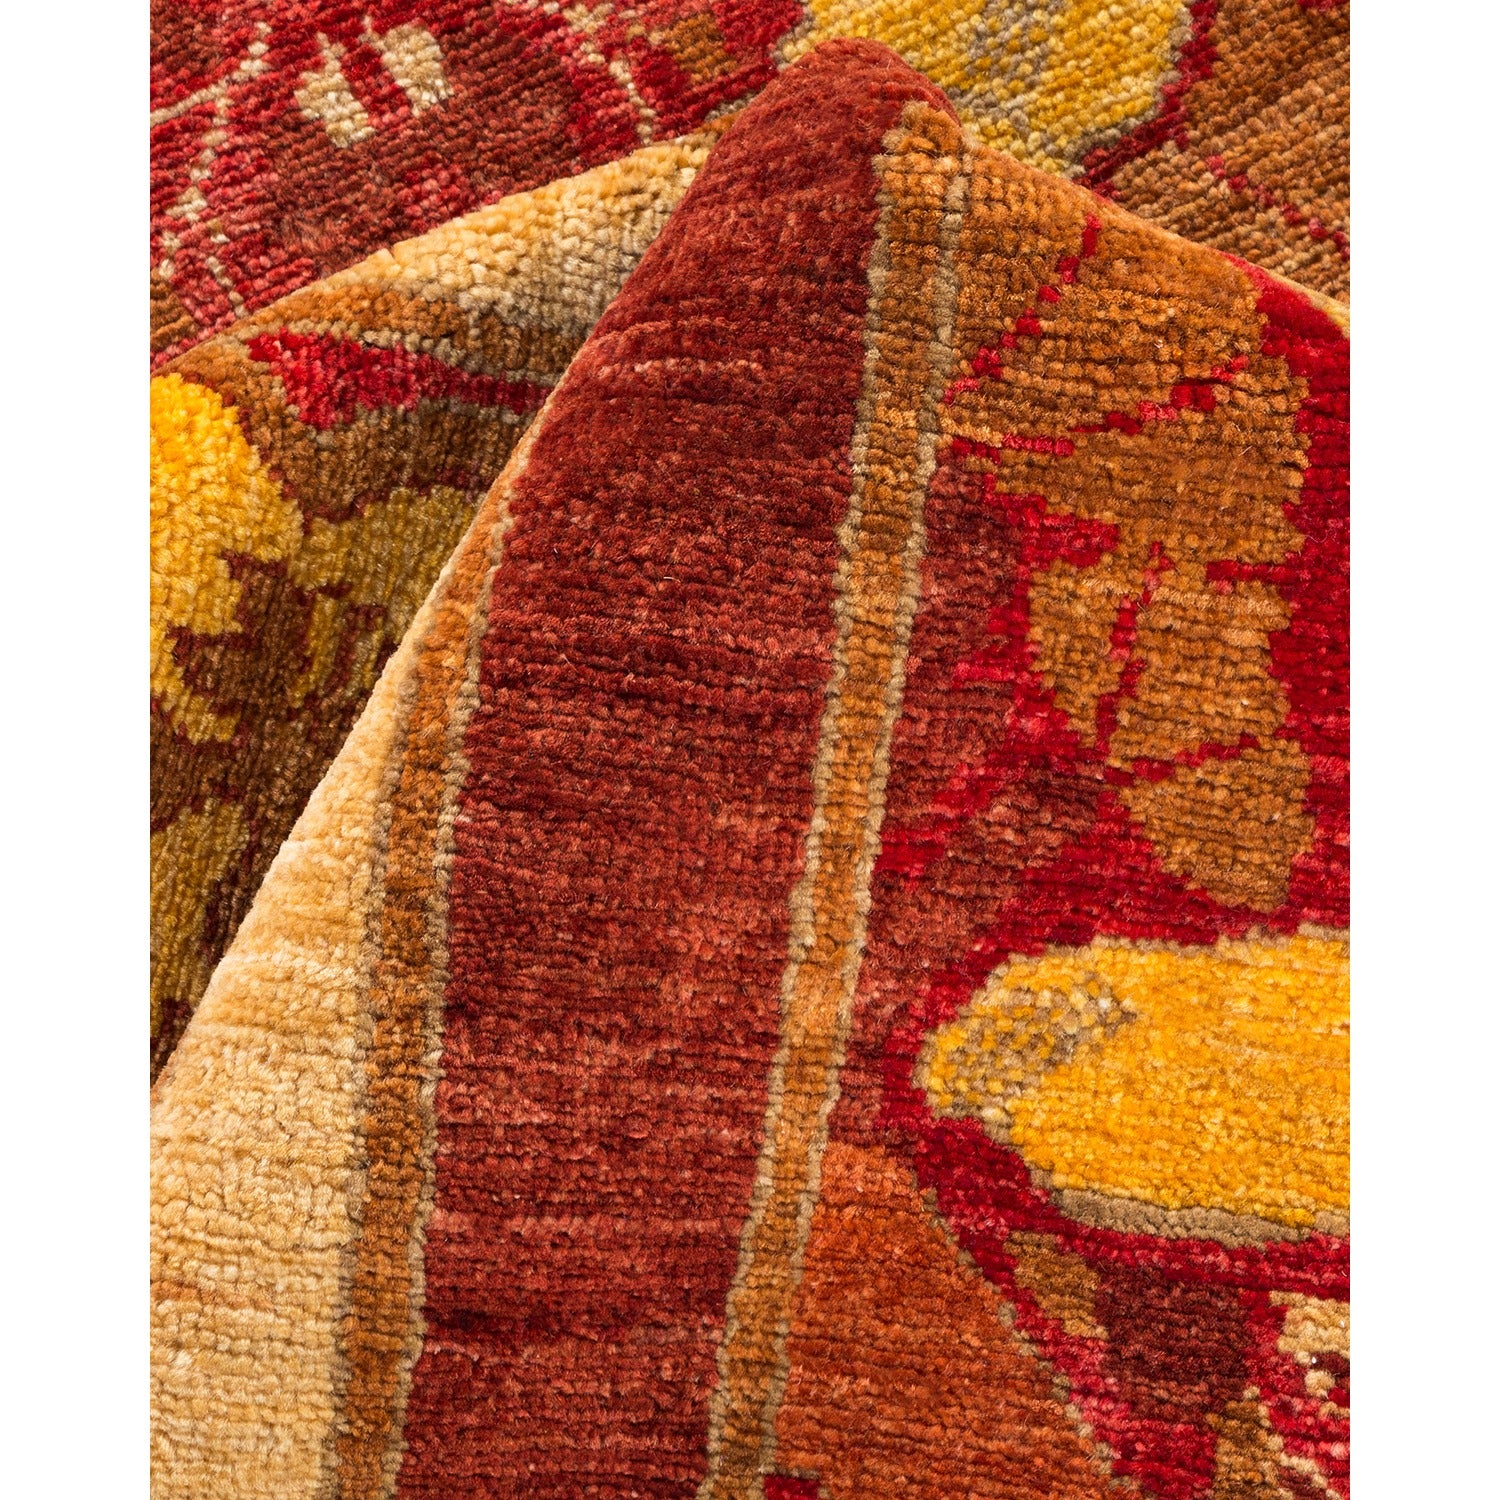 Close-up of a plush, intricately patterned textile with vibrant hues.